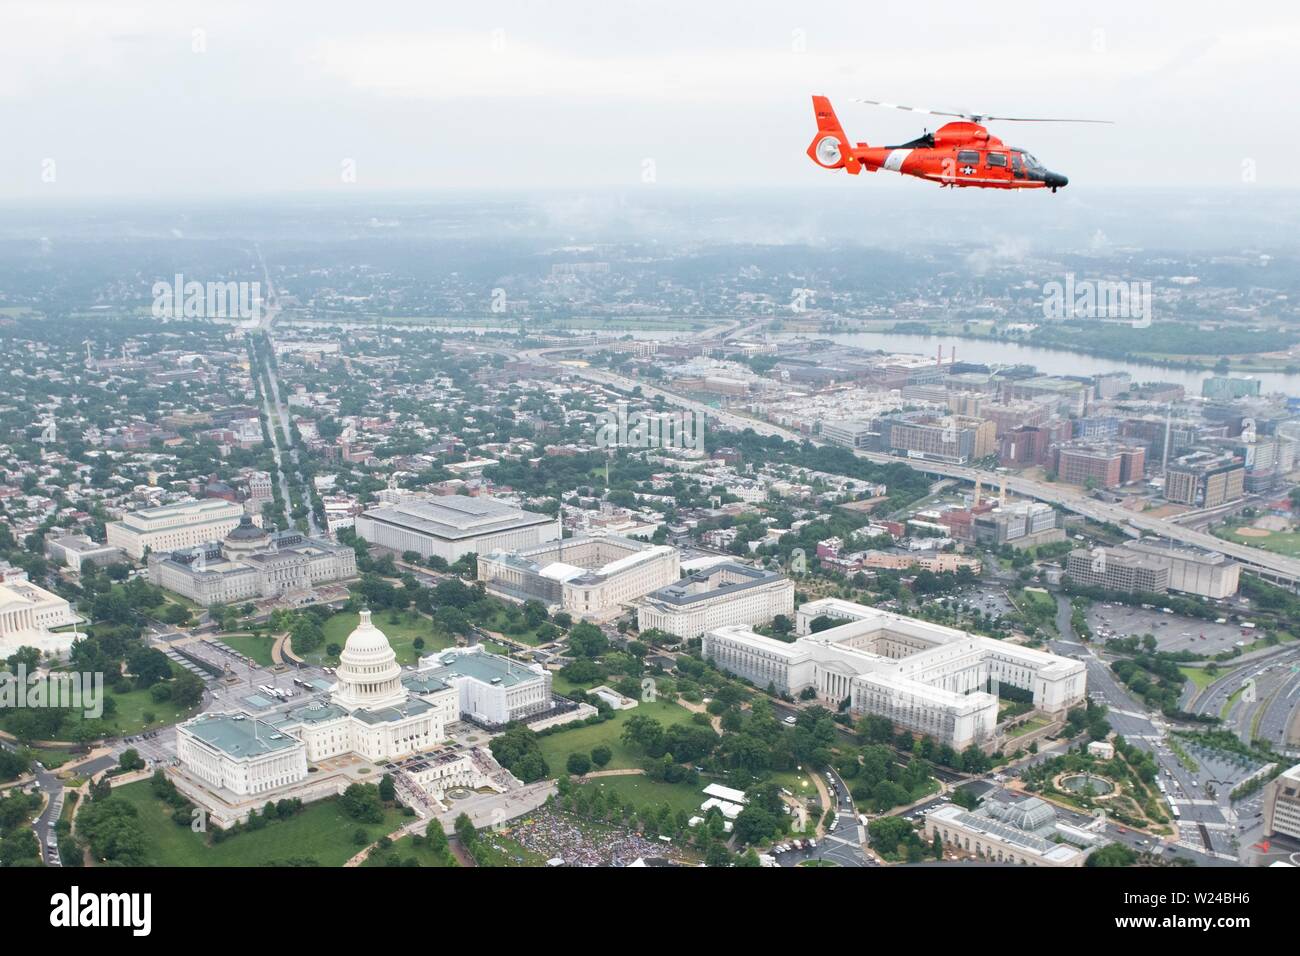 Washington DC, USA. 04th July, 2019. Aerial view of a U.S. Coast Guard MH-65 Dolphin helicopter as it flies in formation over the National Mall during the Salute to America event at the Lincoln Memorial July 4, 2019 in Washington, D.C. Credit: Planetpix/Alamy Live News Stock Photo